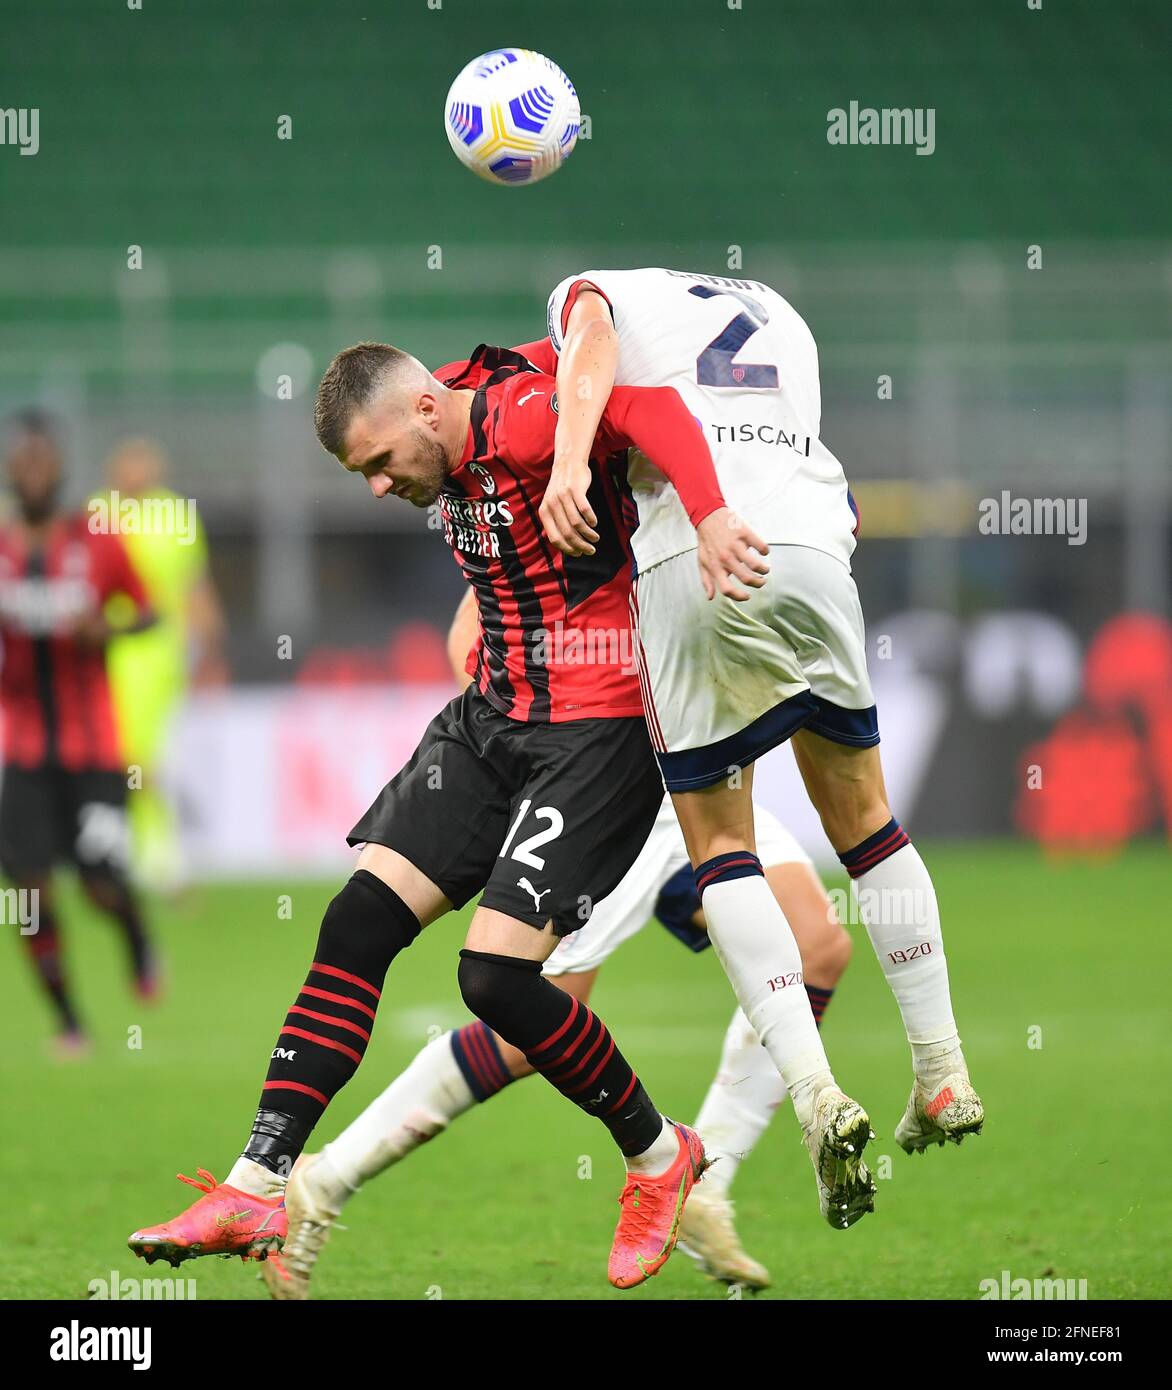 Milan, Italy. 16th May, 2021. AC Milan's Ante Rebic (L) vies with Cagliari's Diego Godin during a Serie A soccer match between AC Milan and Cagliari in Milan, Italy, May 16, 2021. Credit: Daniele Mascolo/Xinhua/Alamy Live News Stock Photo